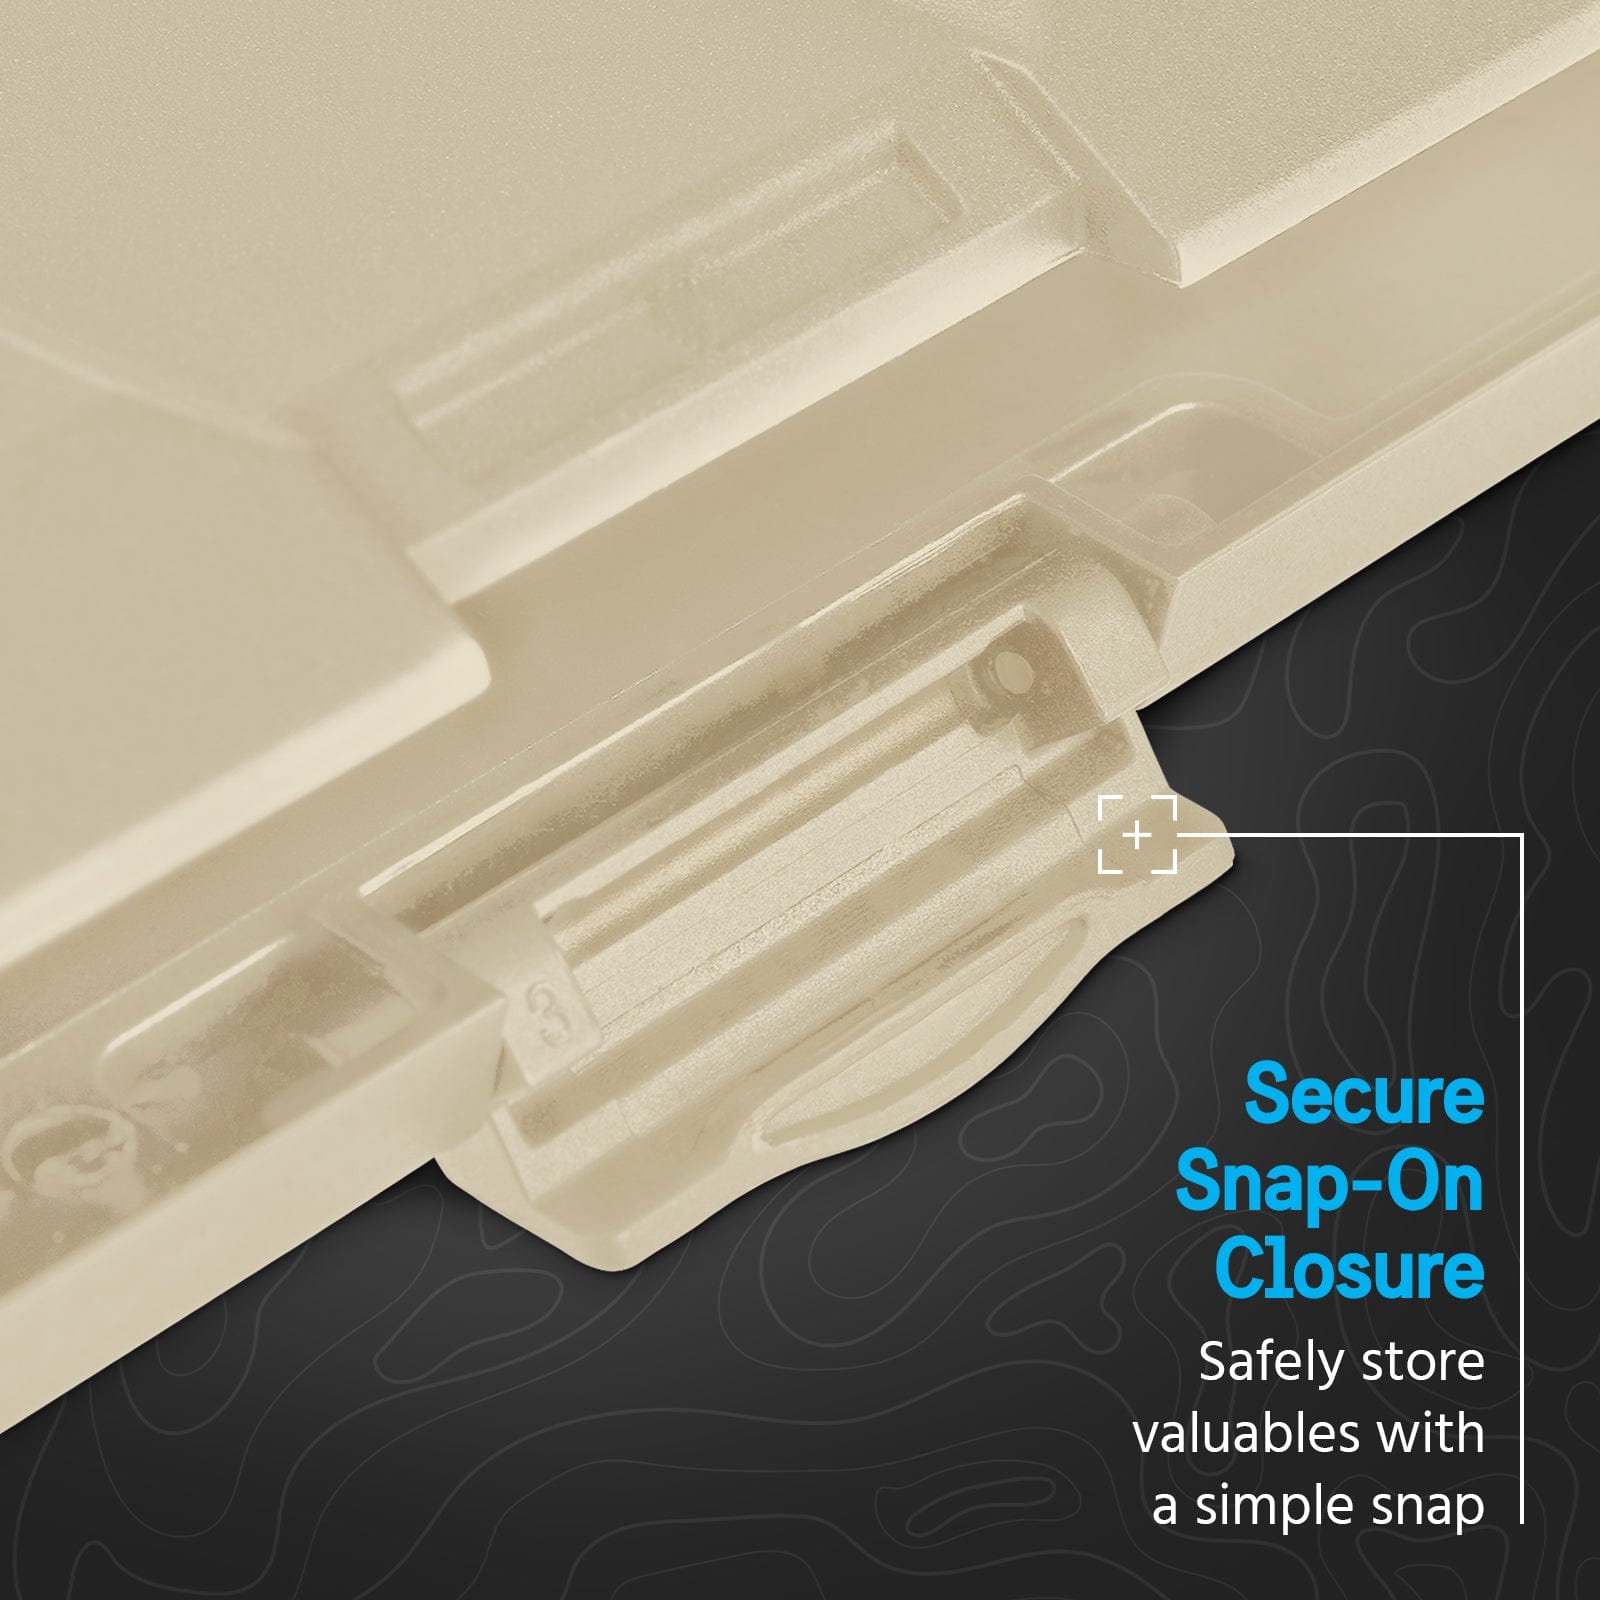 SECURE SNAP-ON CLOSURE. SAFELY STORE VALUABLES WITH A SIMPLE SNAP.